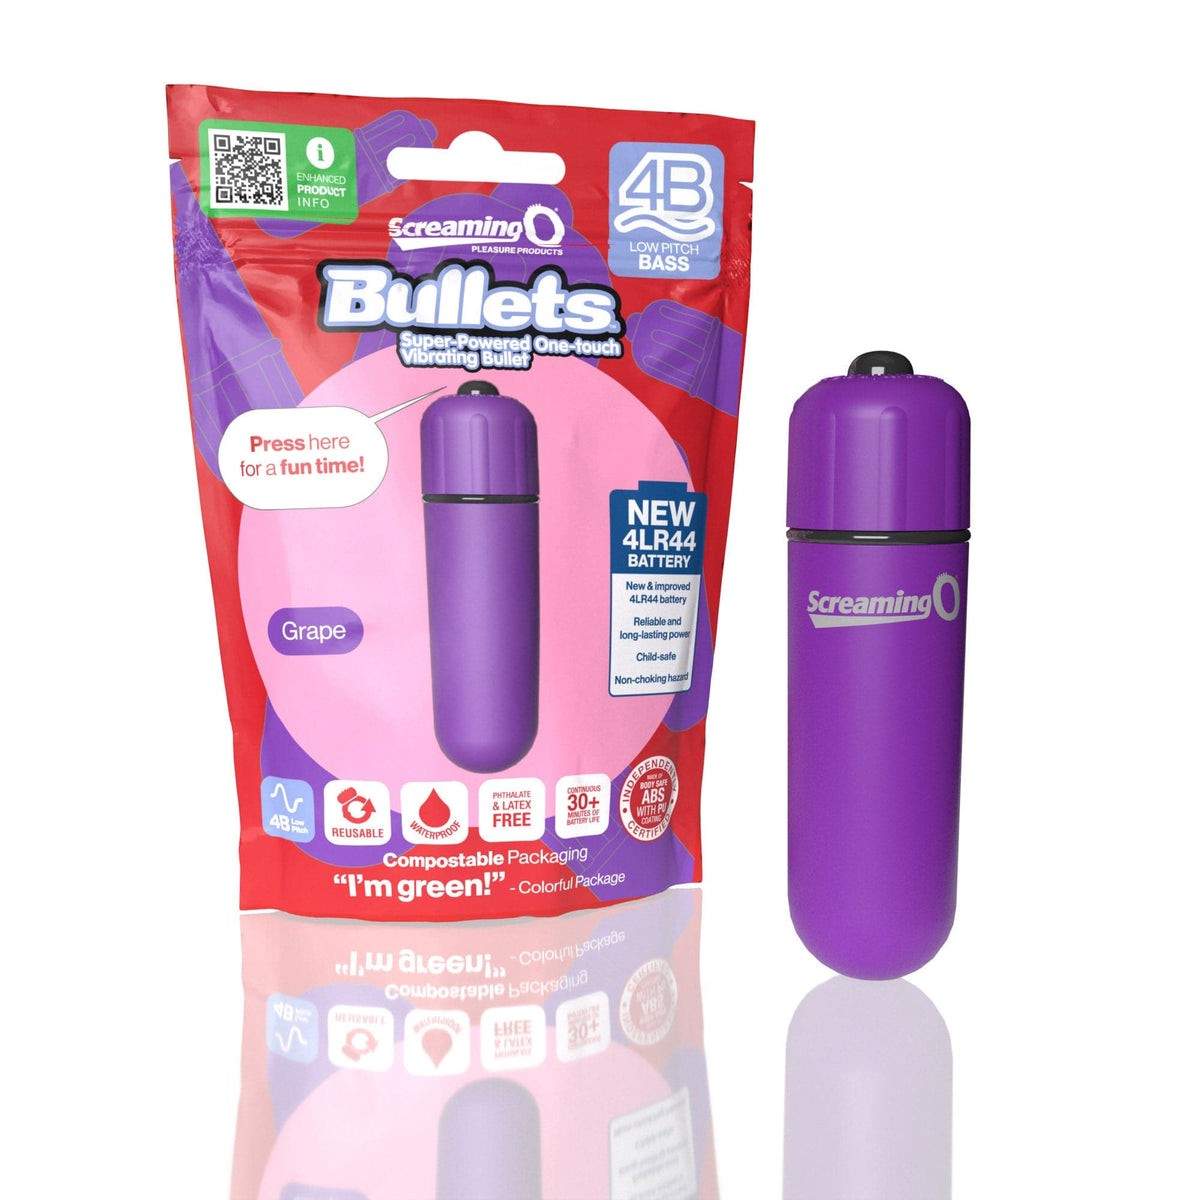 screaming o 4b bullet super powered one touch vibrating bullet grape